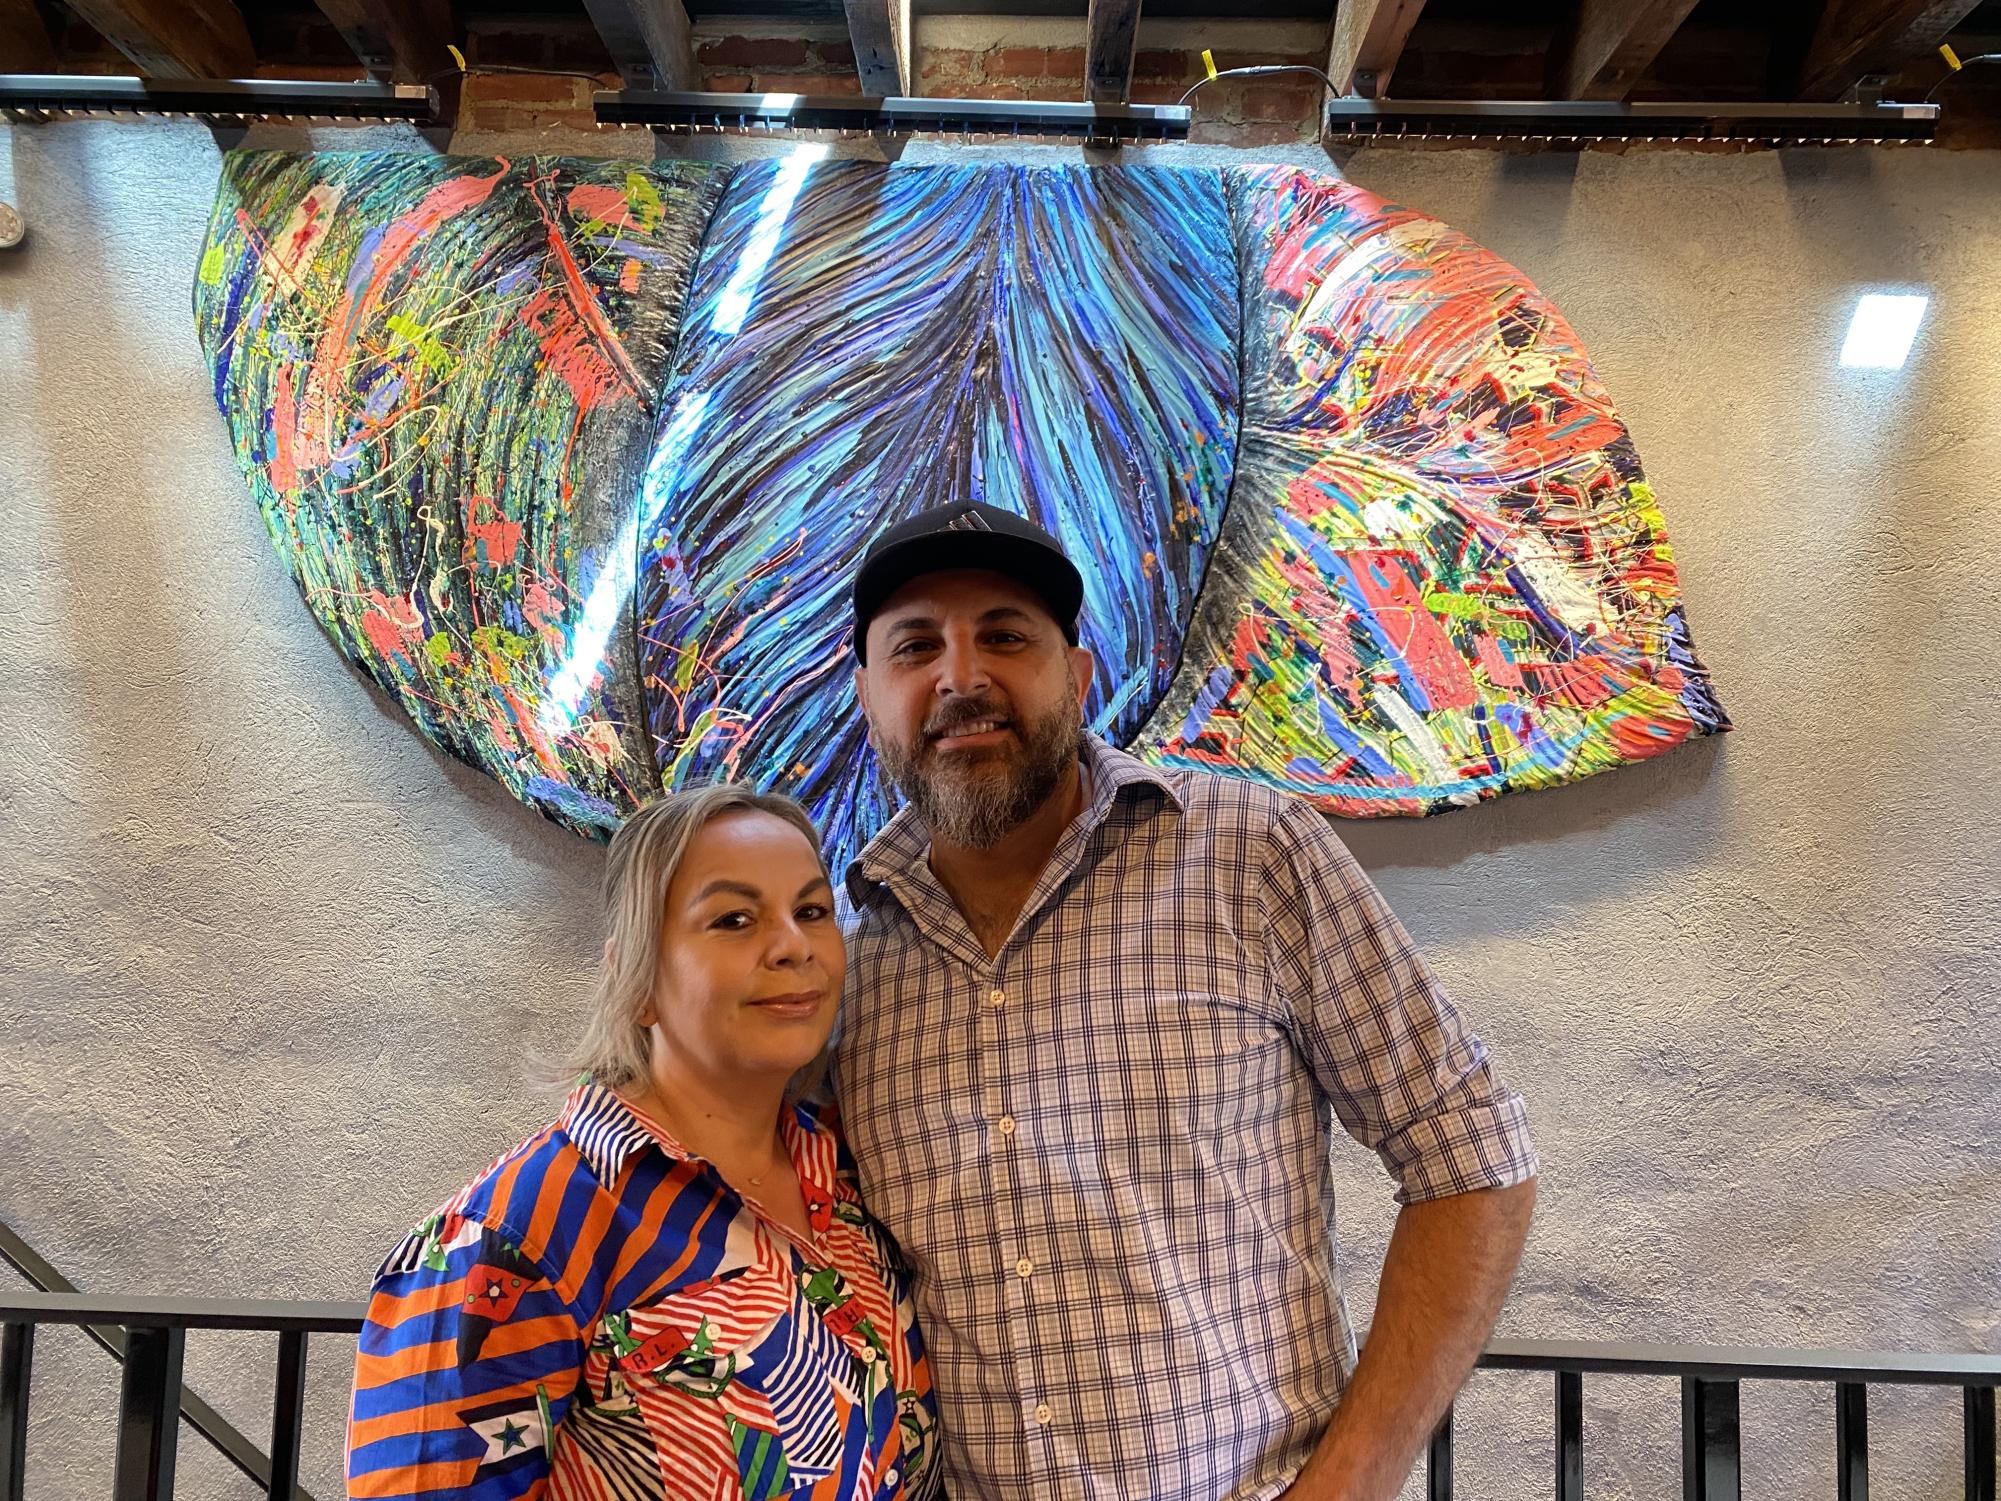 Hever and Dina Palacios join a number of other Peekskill restaurateurs with two dining establishments in the downtown. (Photo by Steve Pavlopoulos)